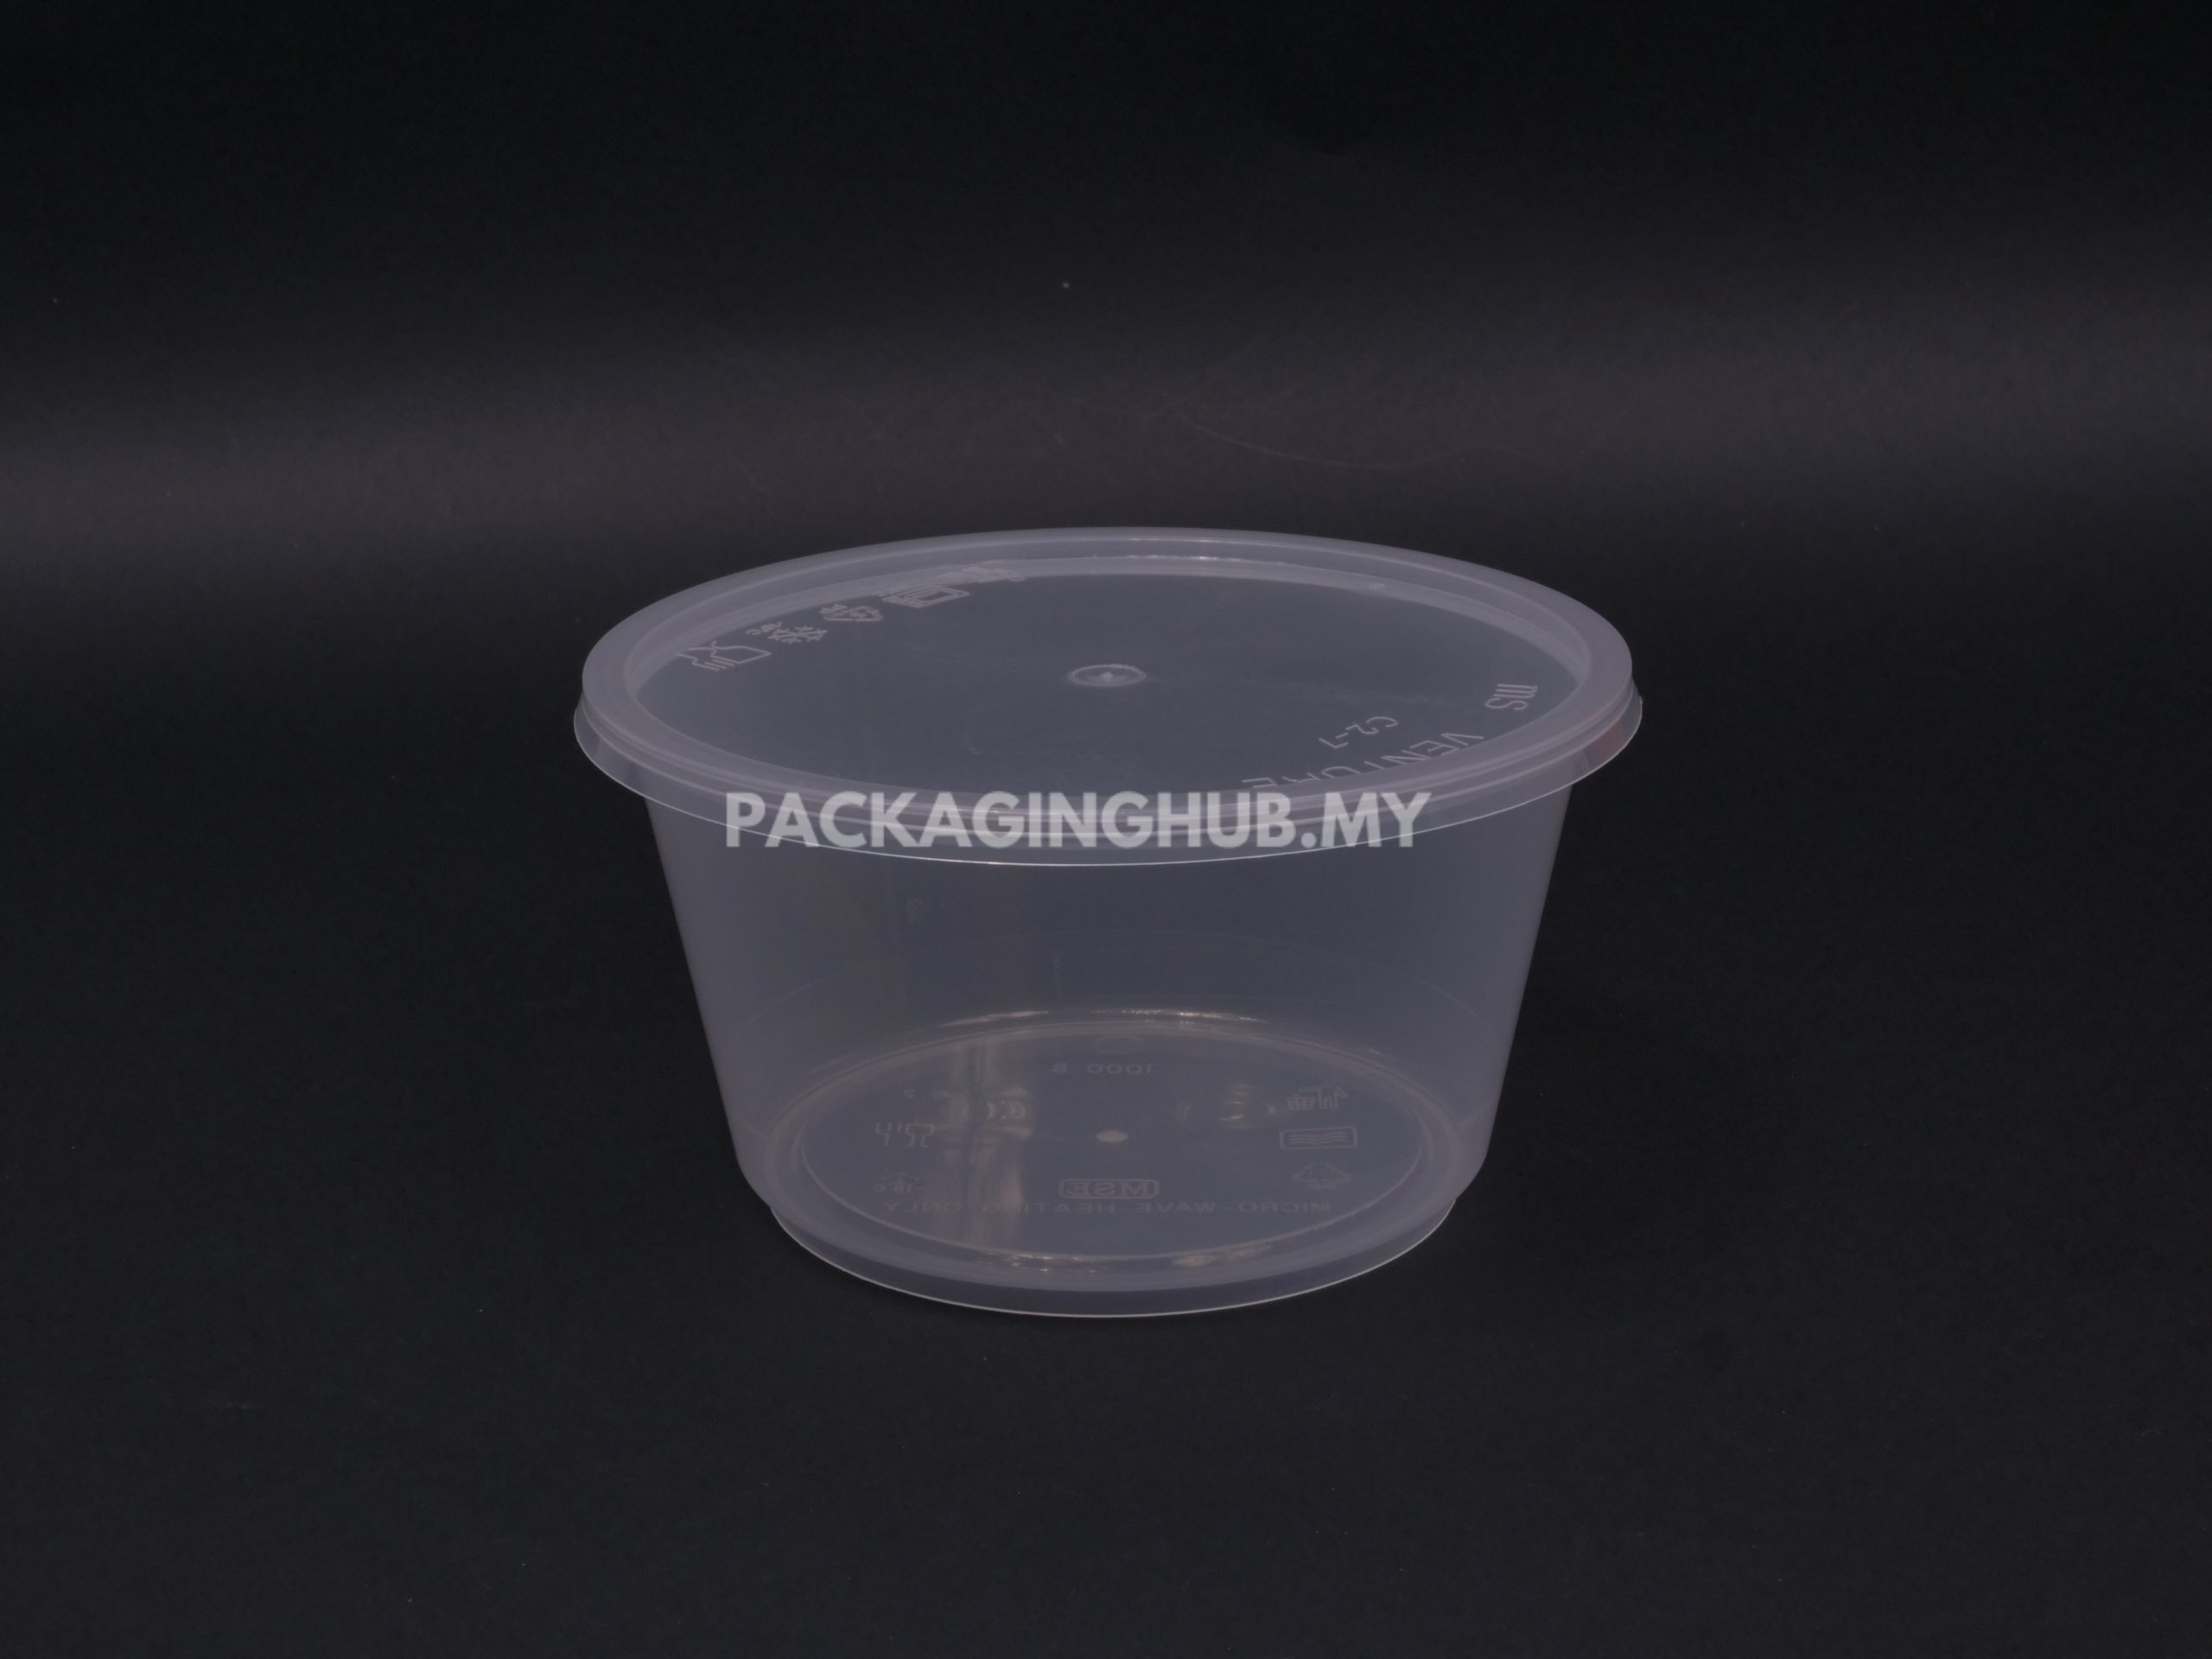 MS 1000B ROUND CONTAINER – WhatsApp us at 8923 7833 for more details